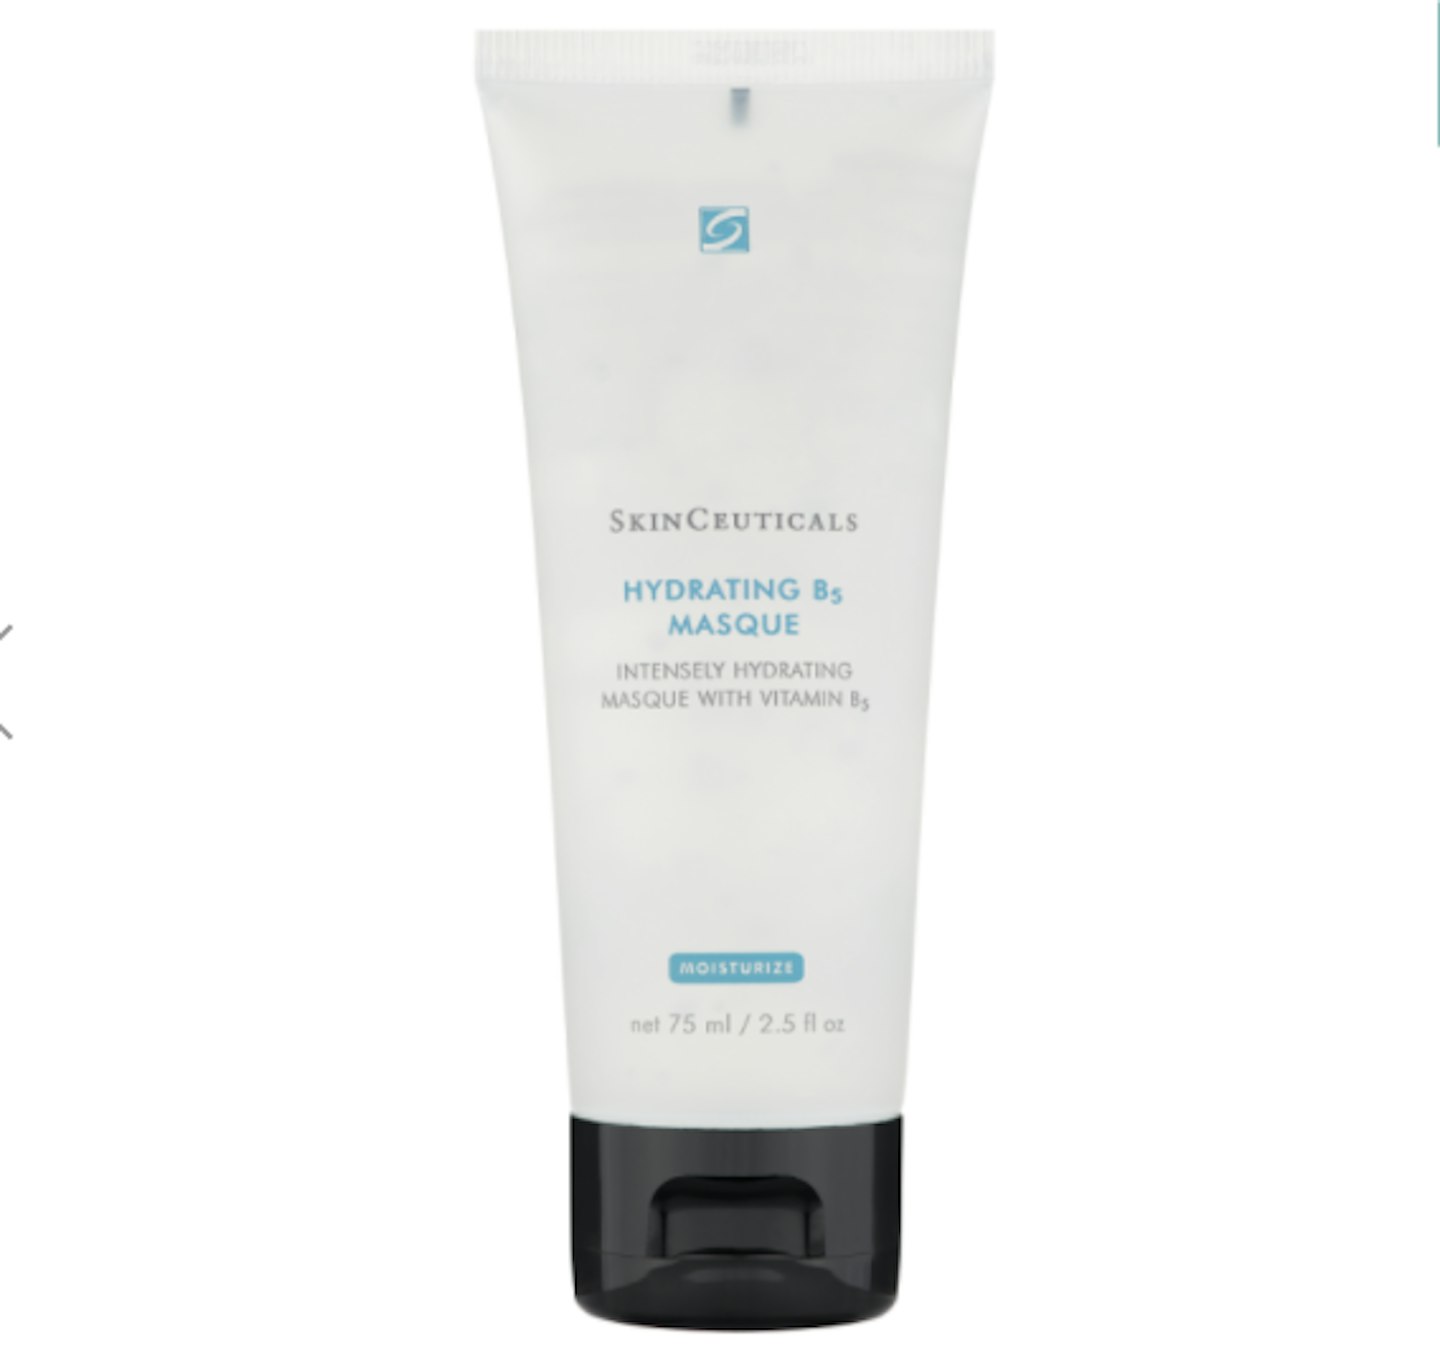 skinceuticals face mask